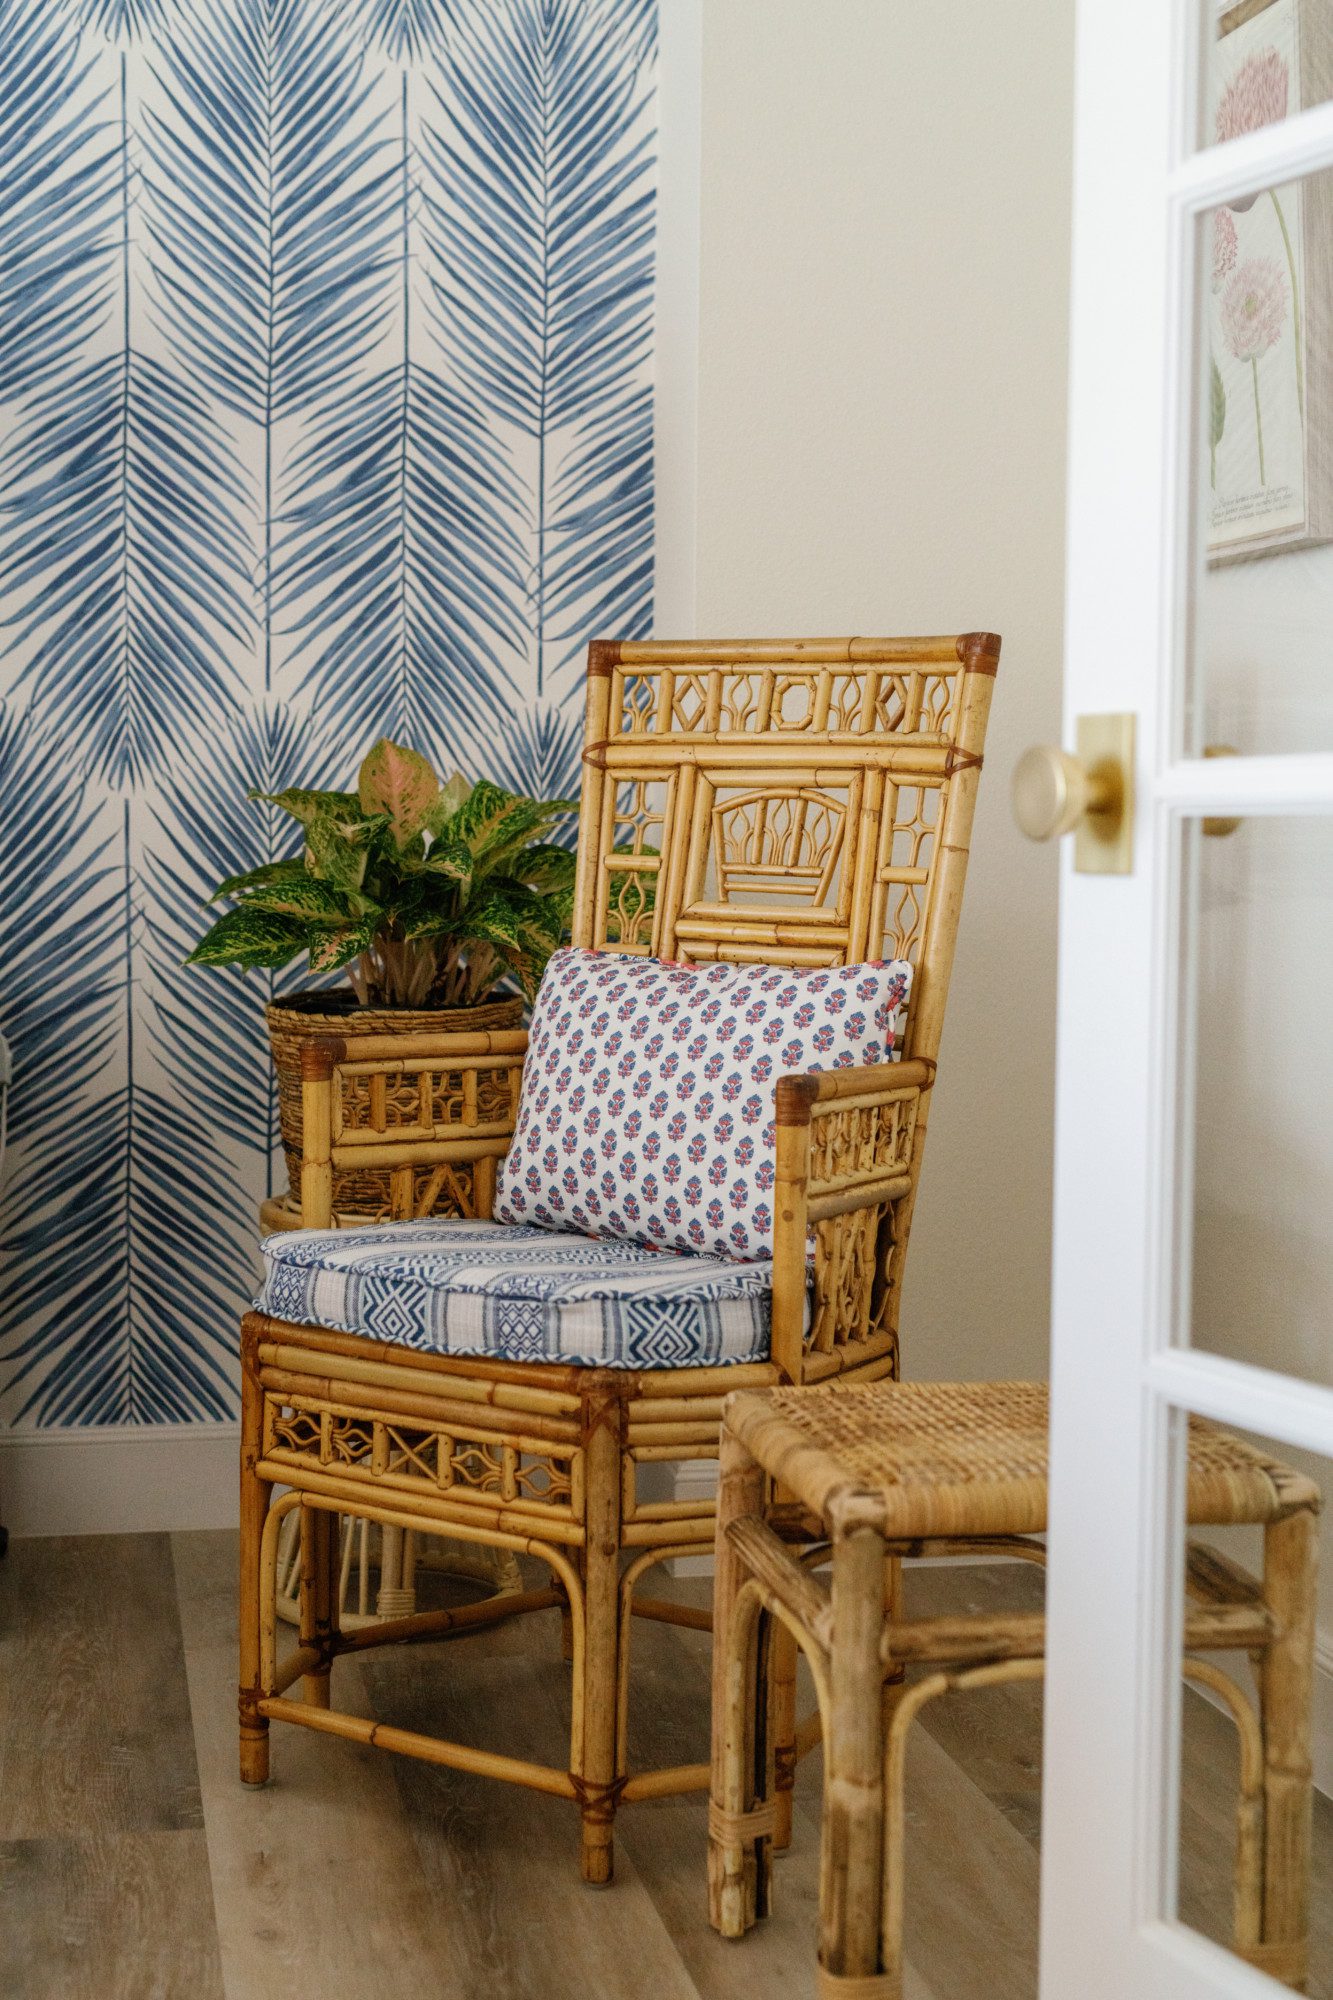 a bamboo chair in a bohemian room